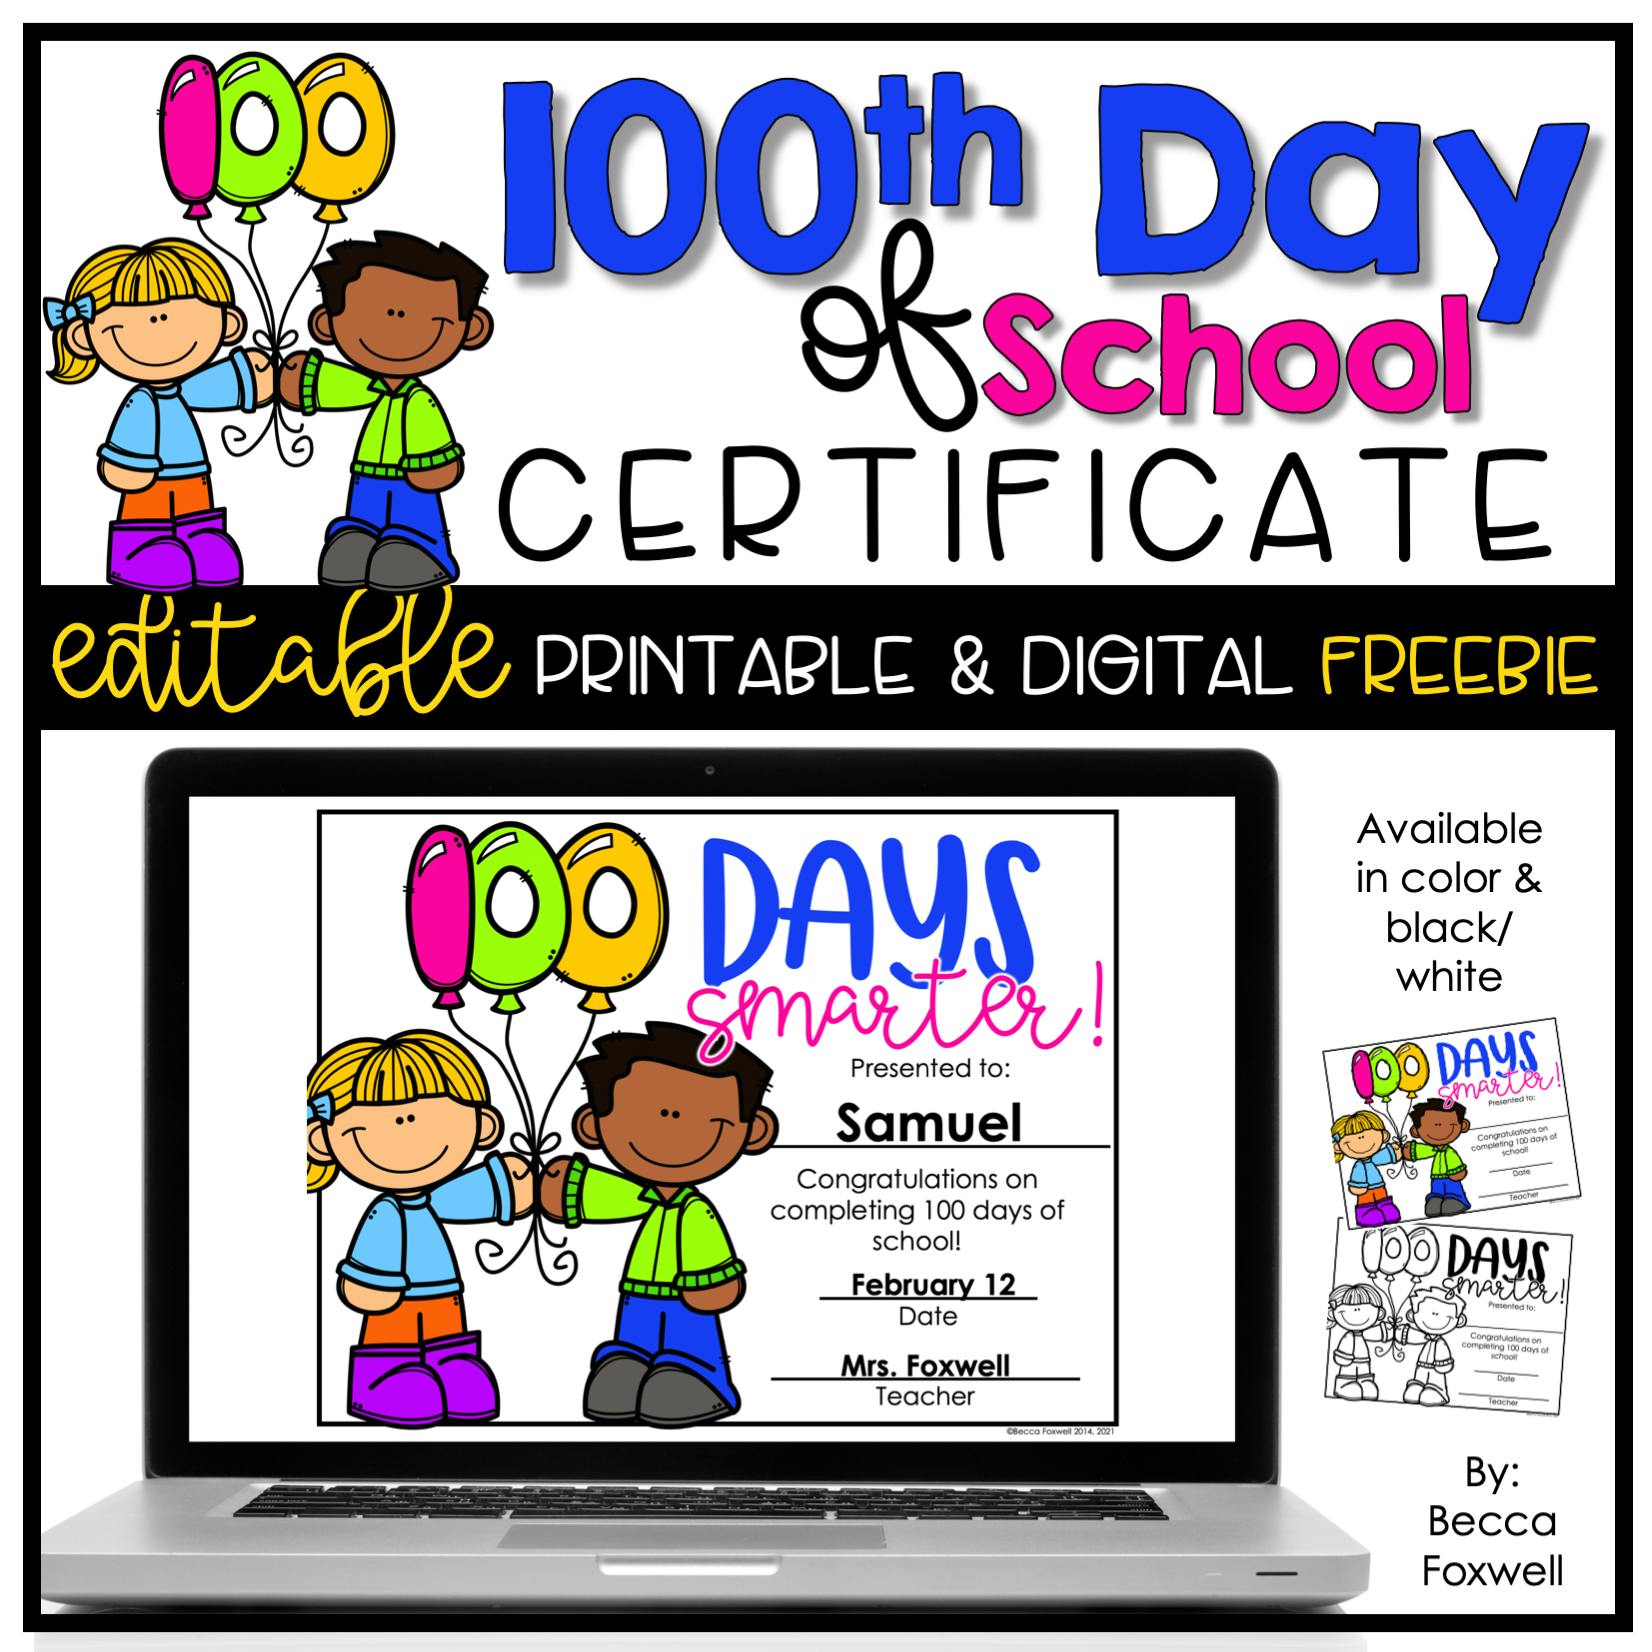 celebrate-the-100th-day-of-school-with-this-cute-printable-this-free